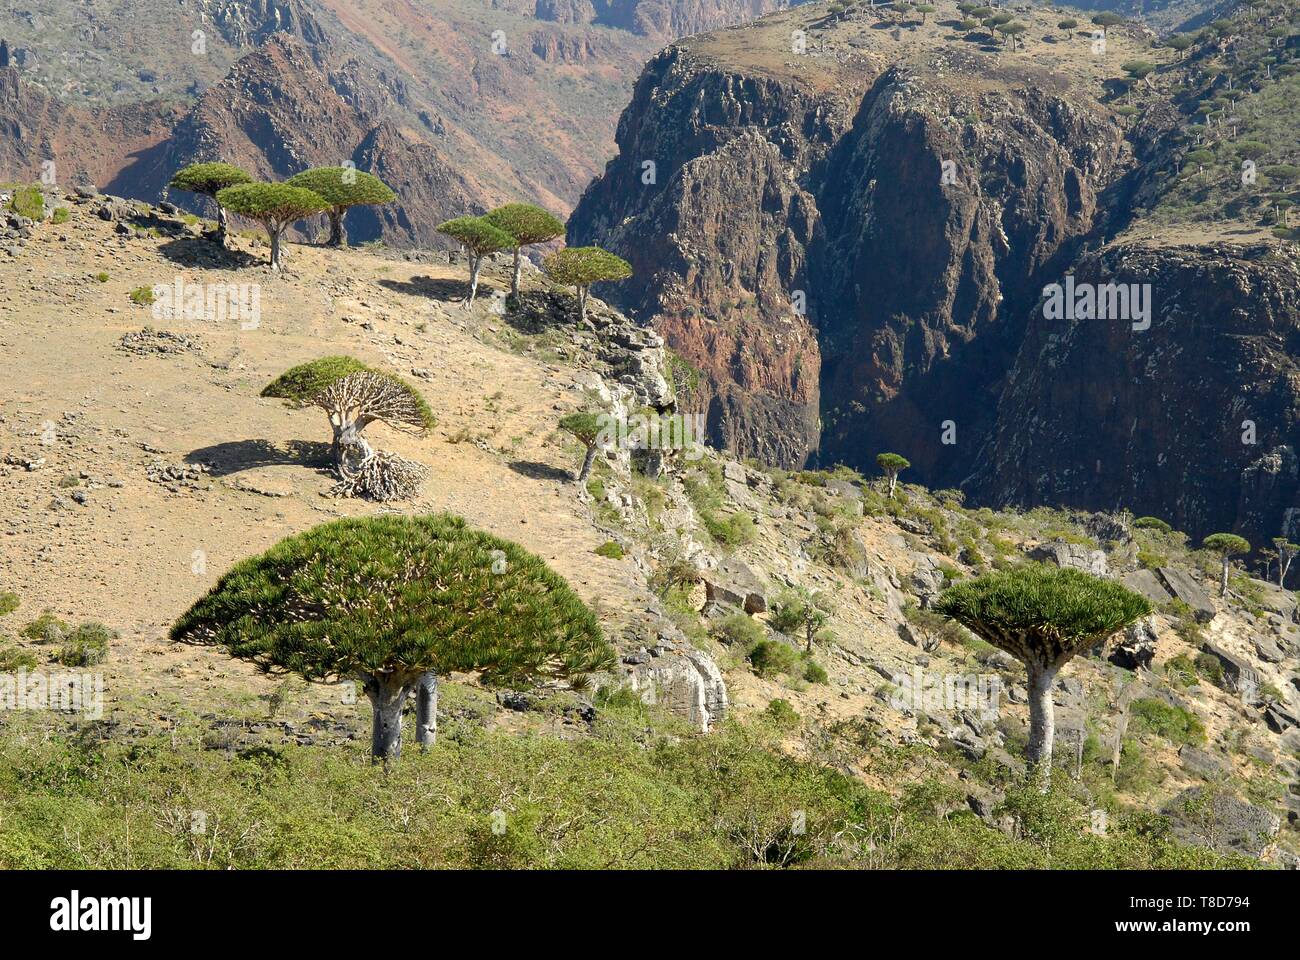 Yemen, Socotra Governorate, Socotra Island, listed as World Heritage by UNESCO, Dicksam, forest of Socotra dragon tree (Dracaena cinnabari), endemic species Stock Photo